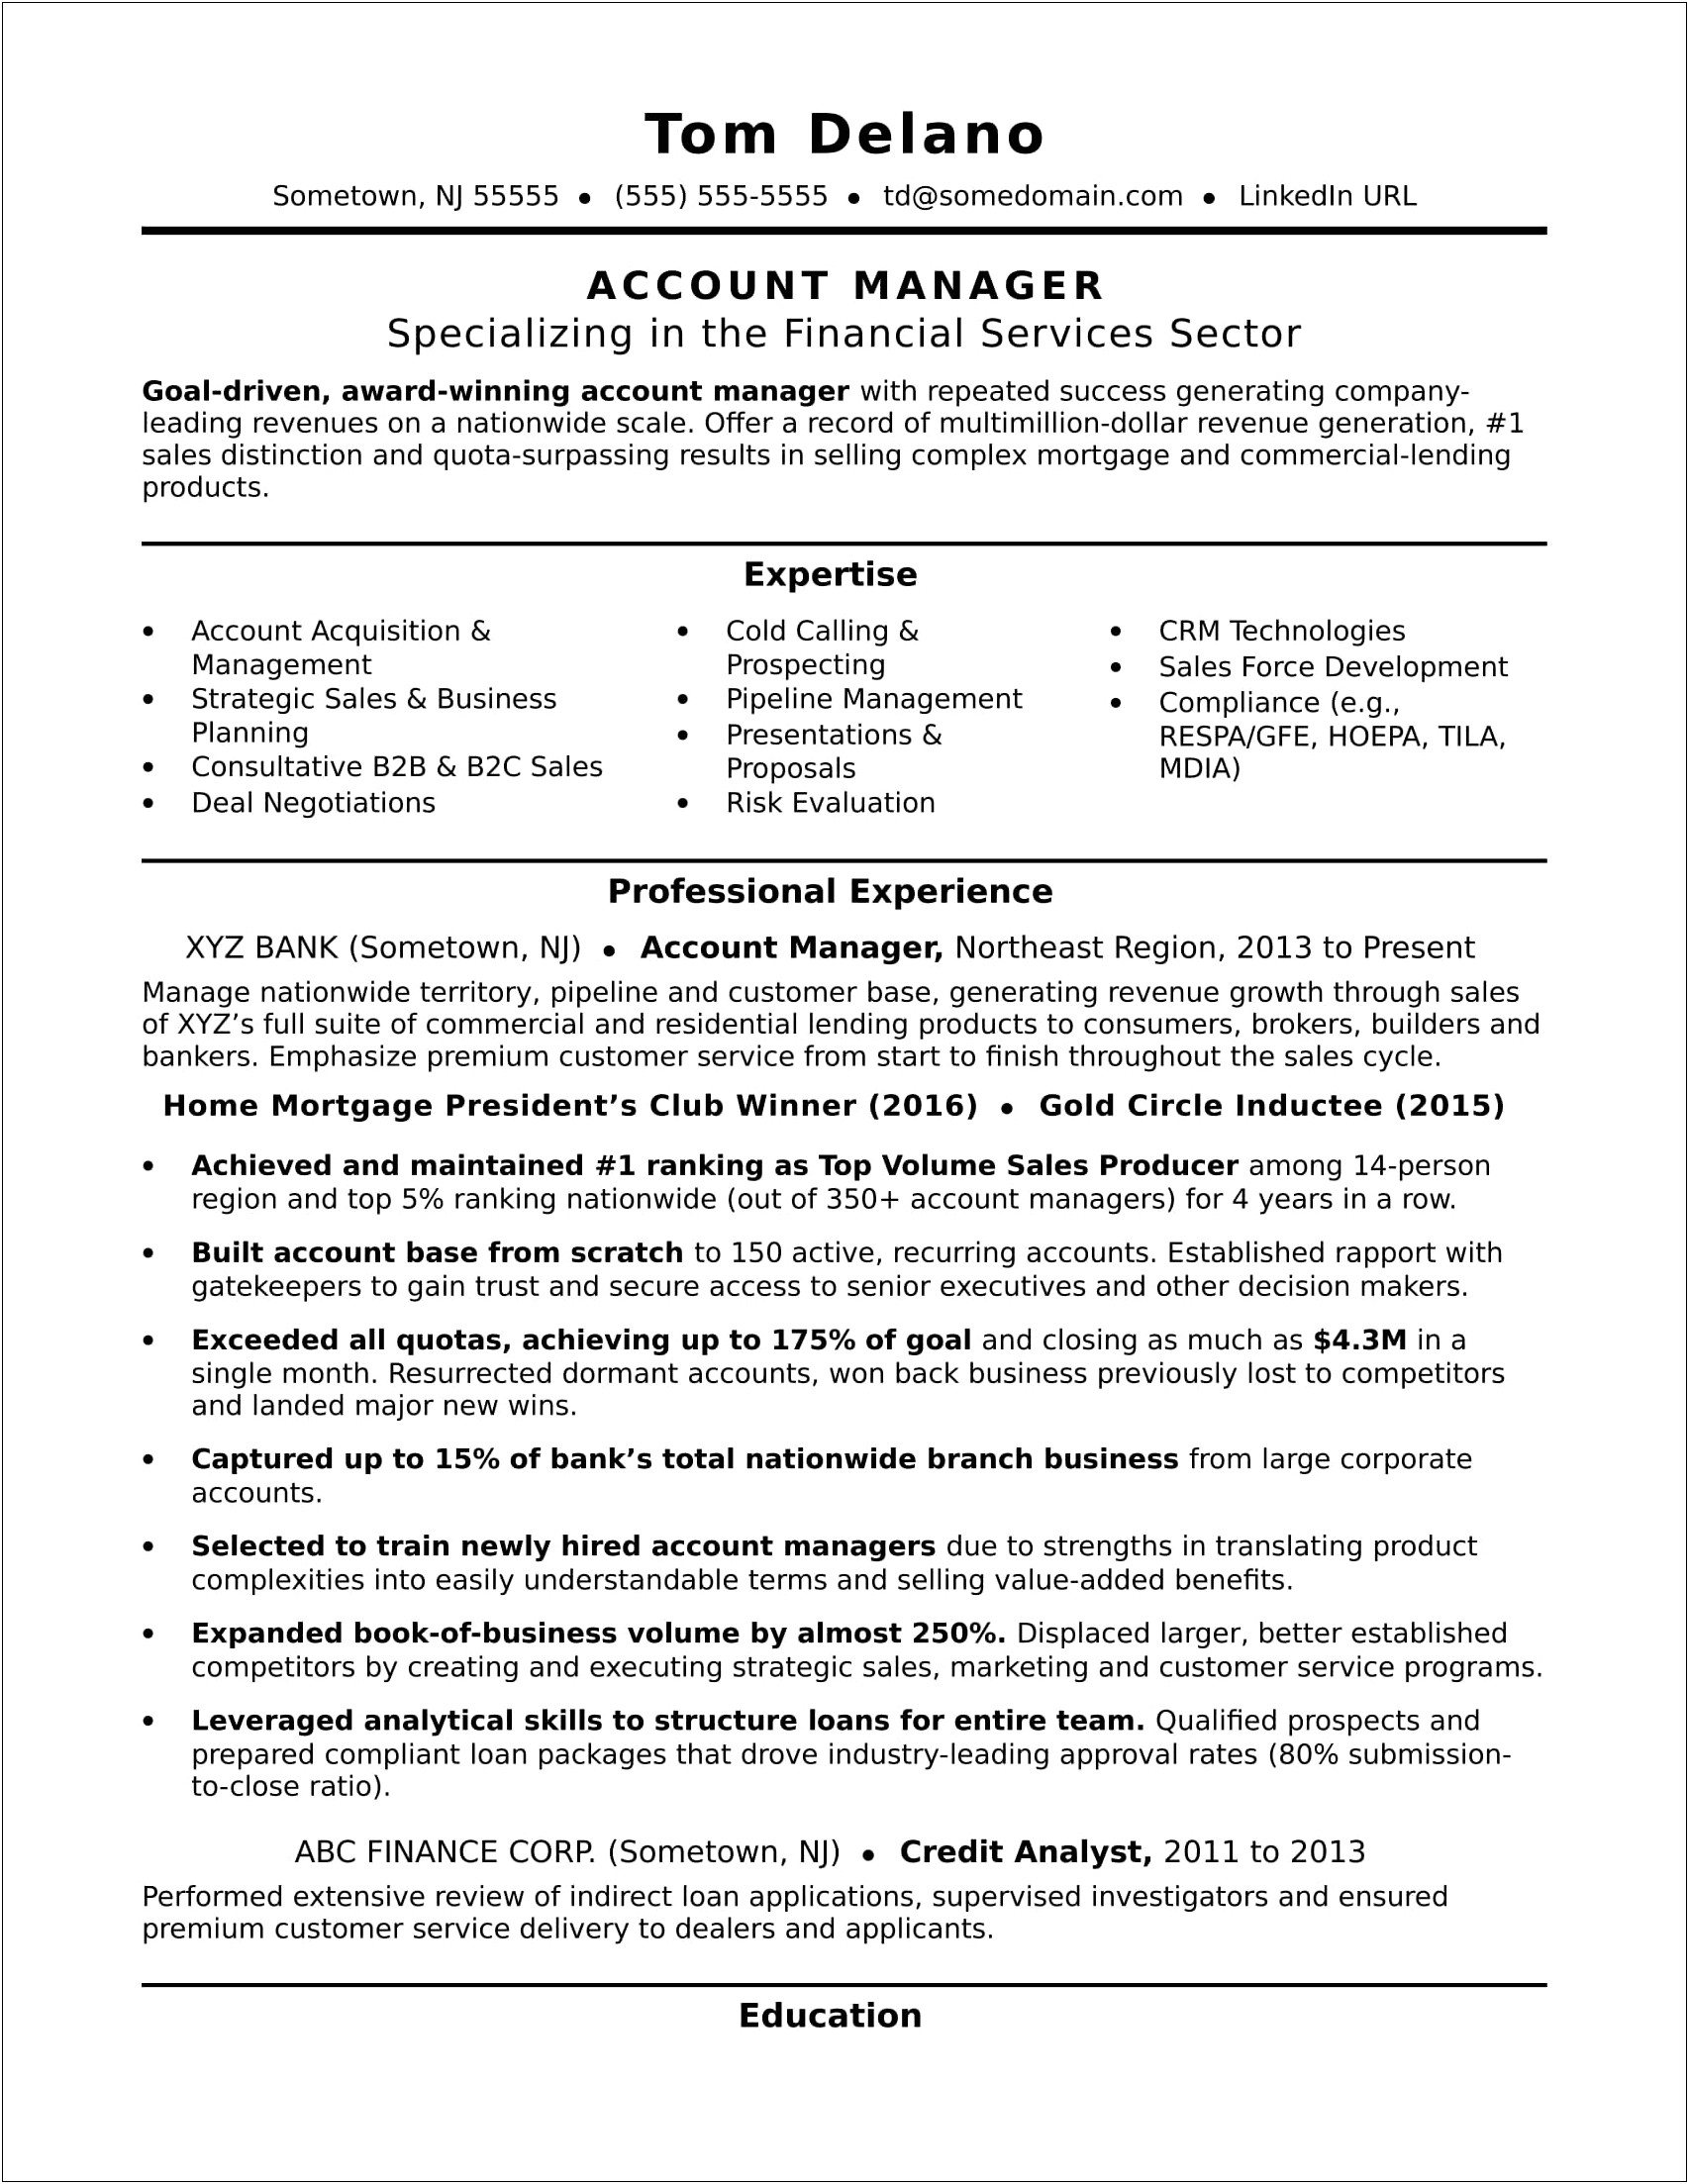 Manage Business Checking And Savings Accounts Resume